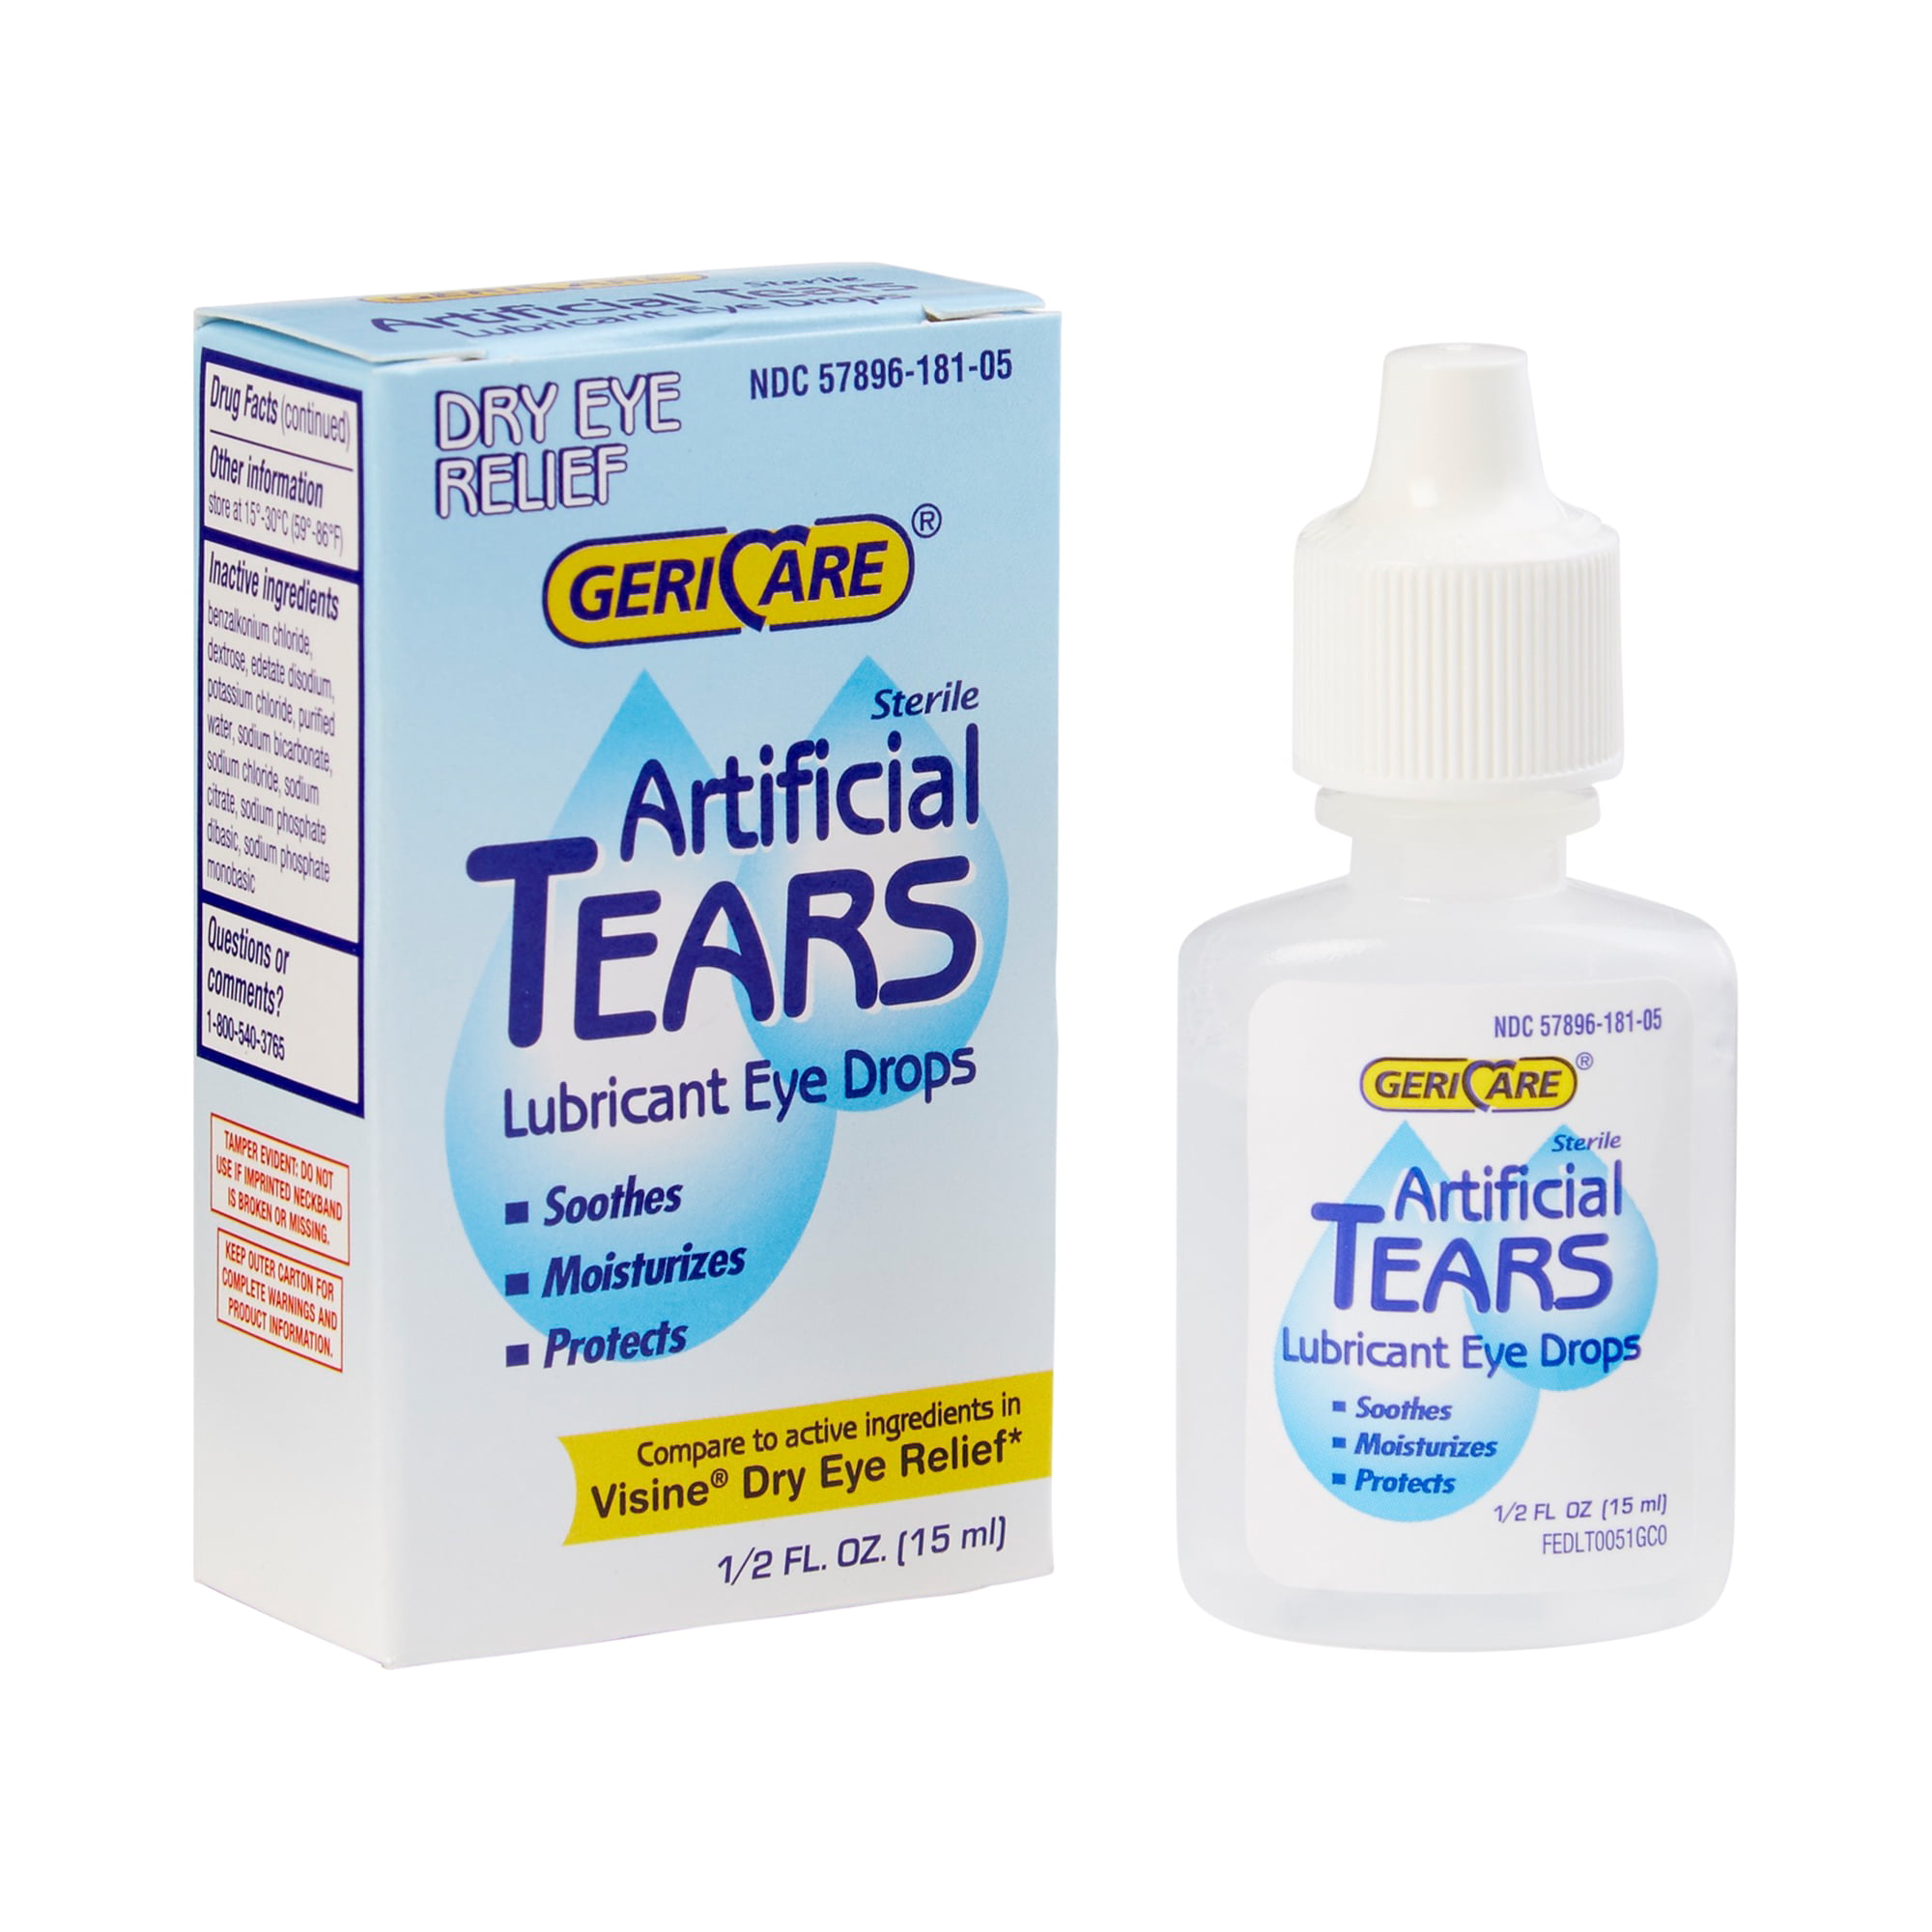 Artificial tears ointment